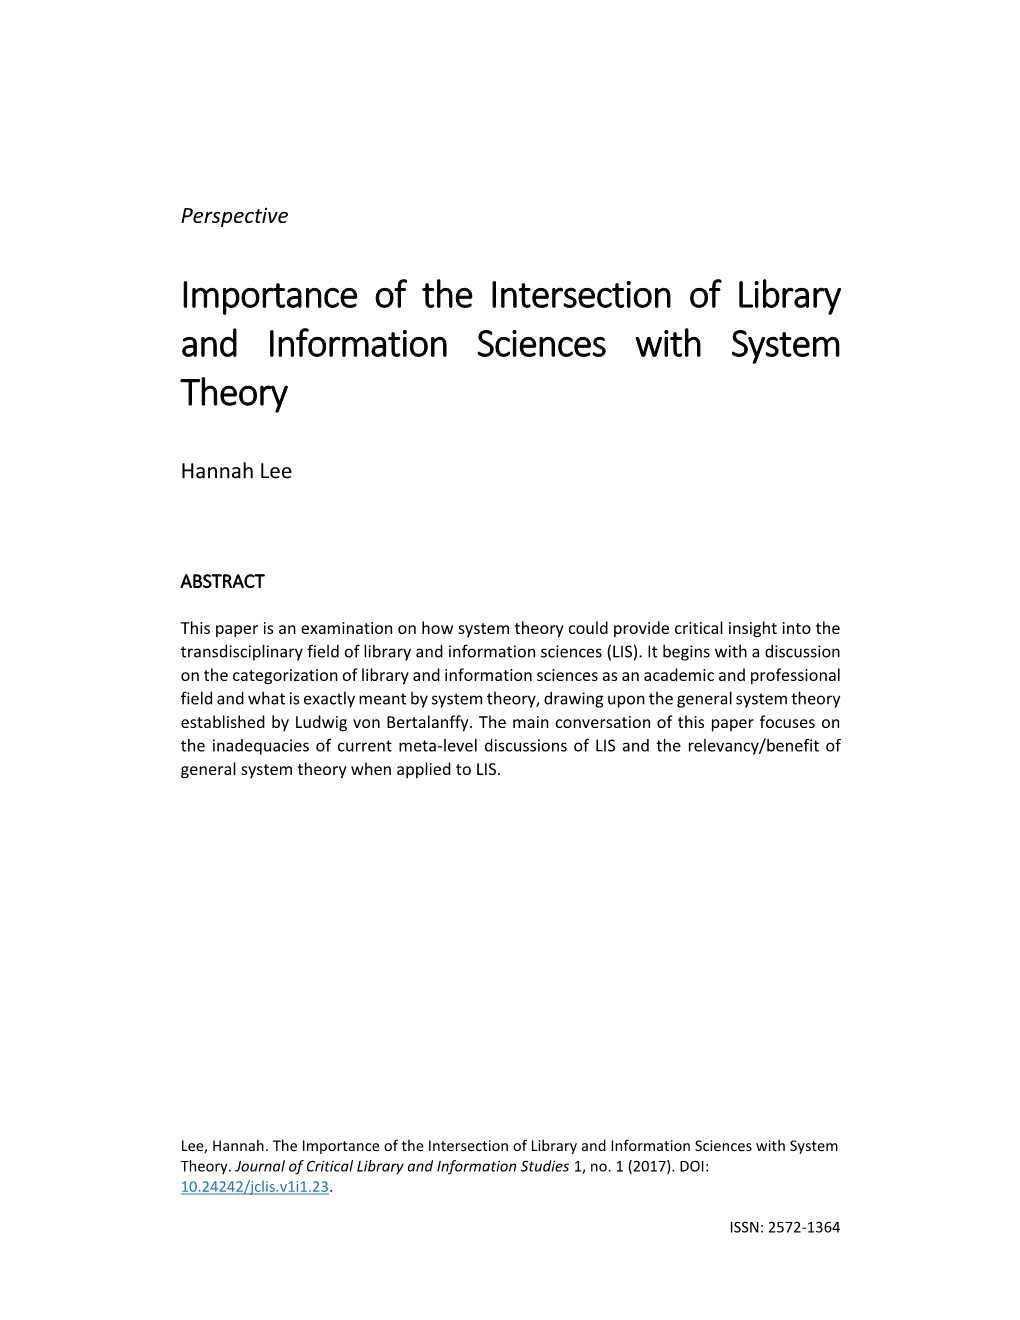 Importance of the Intersection of Library and Information Sciences with System Theory